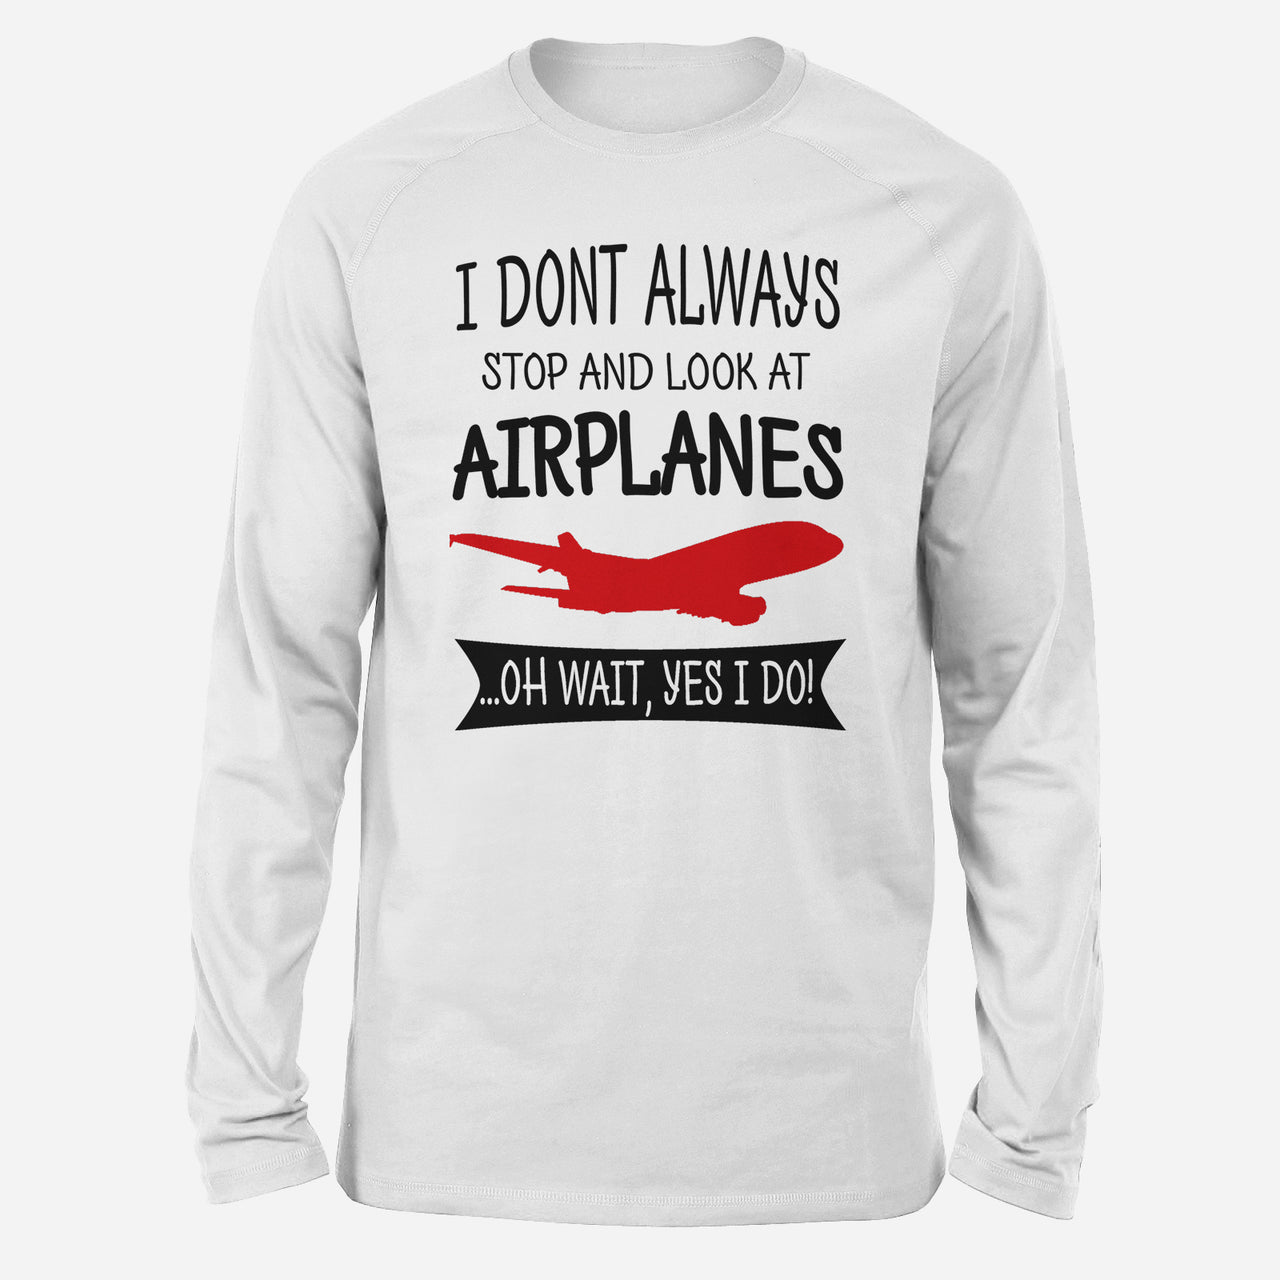 I Don't Always Stop and Look at Airplanes Designed Long-Sleeve T-Shirts